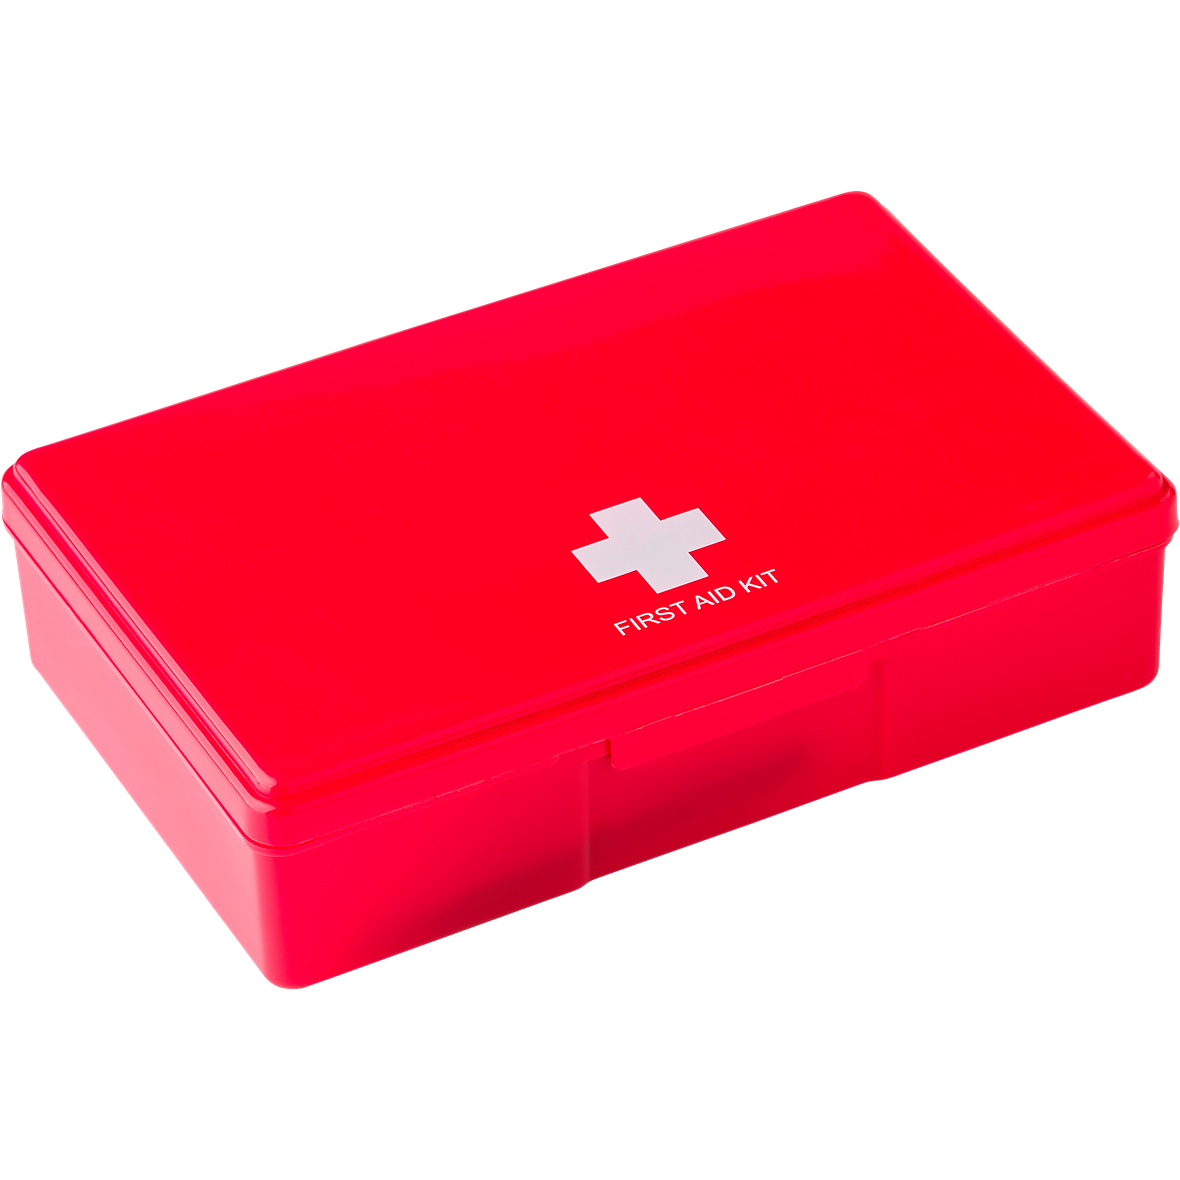 First Aid Kit    